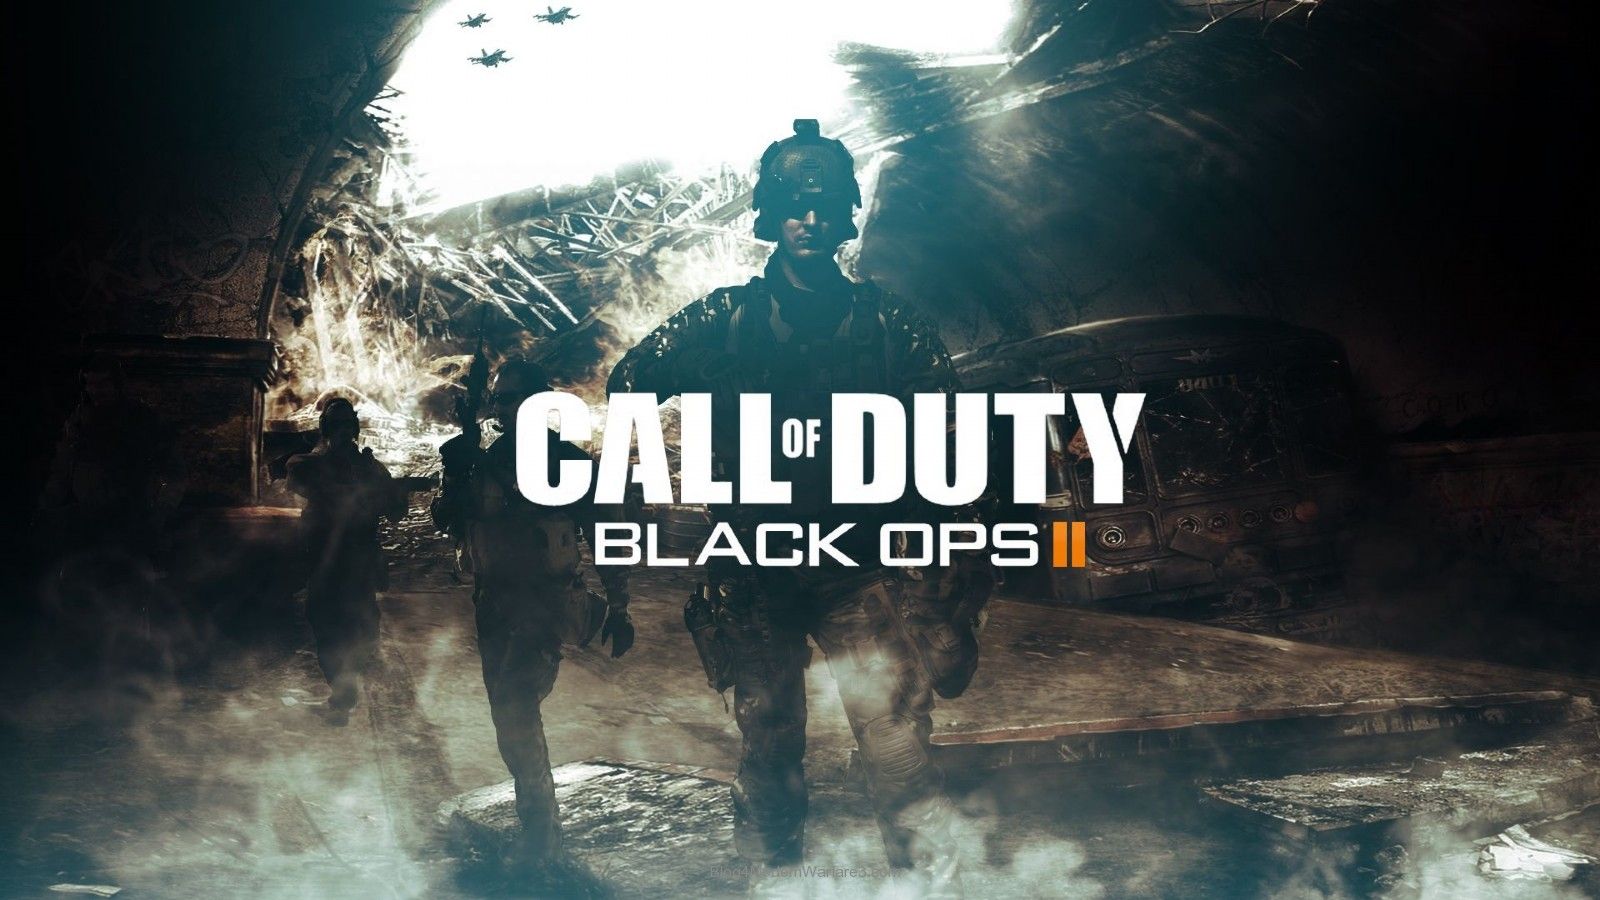 New Wallpaper Background For Call Of Duty Black Ops 2 Image GamesHD